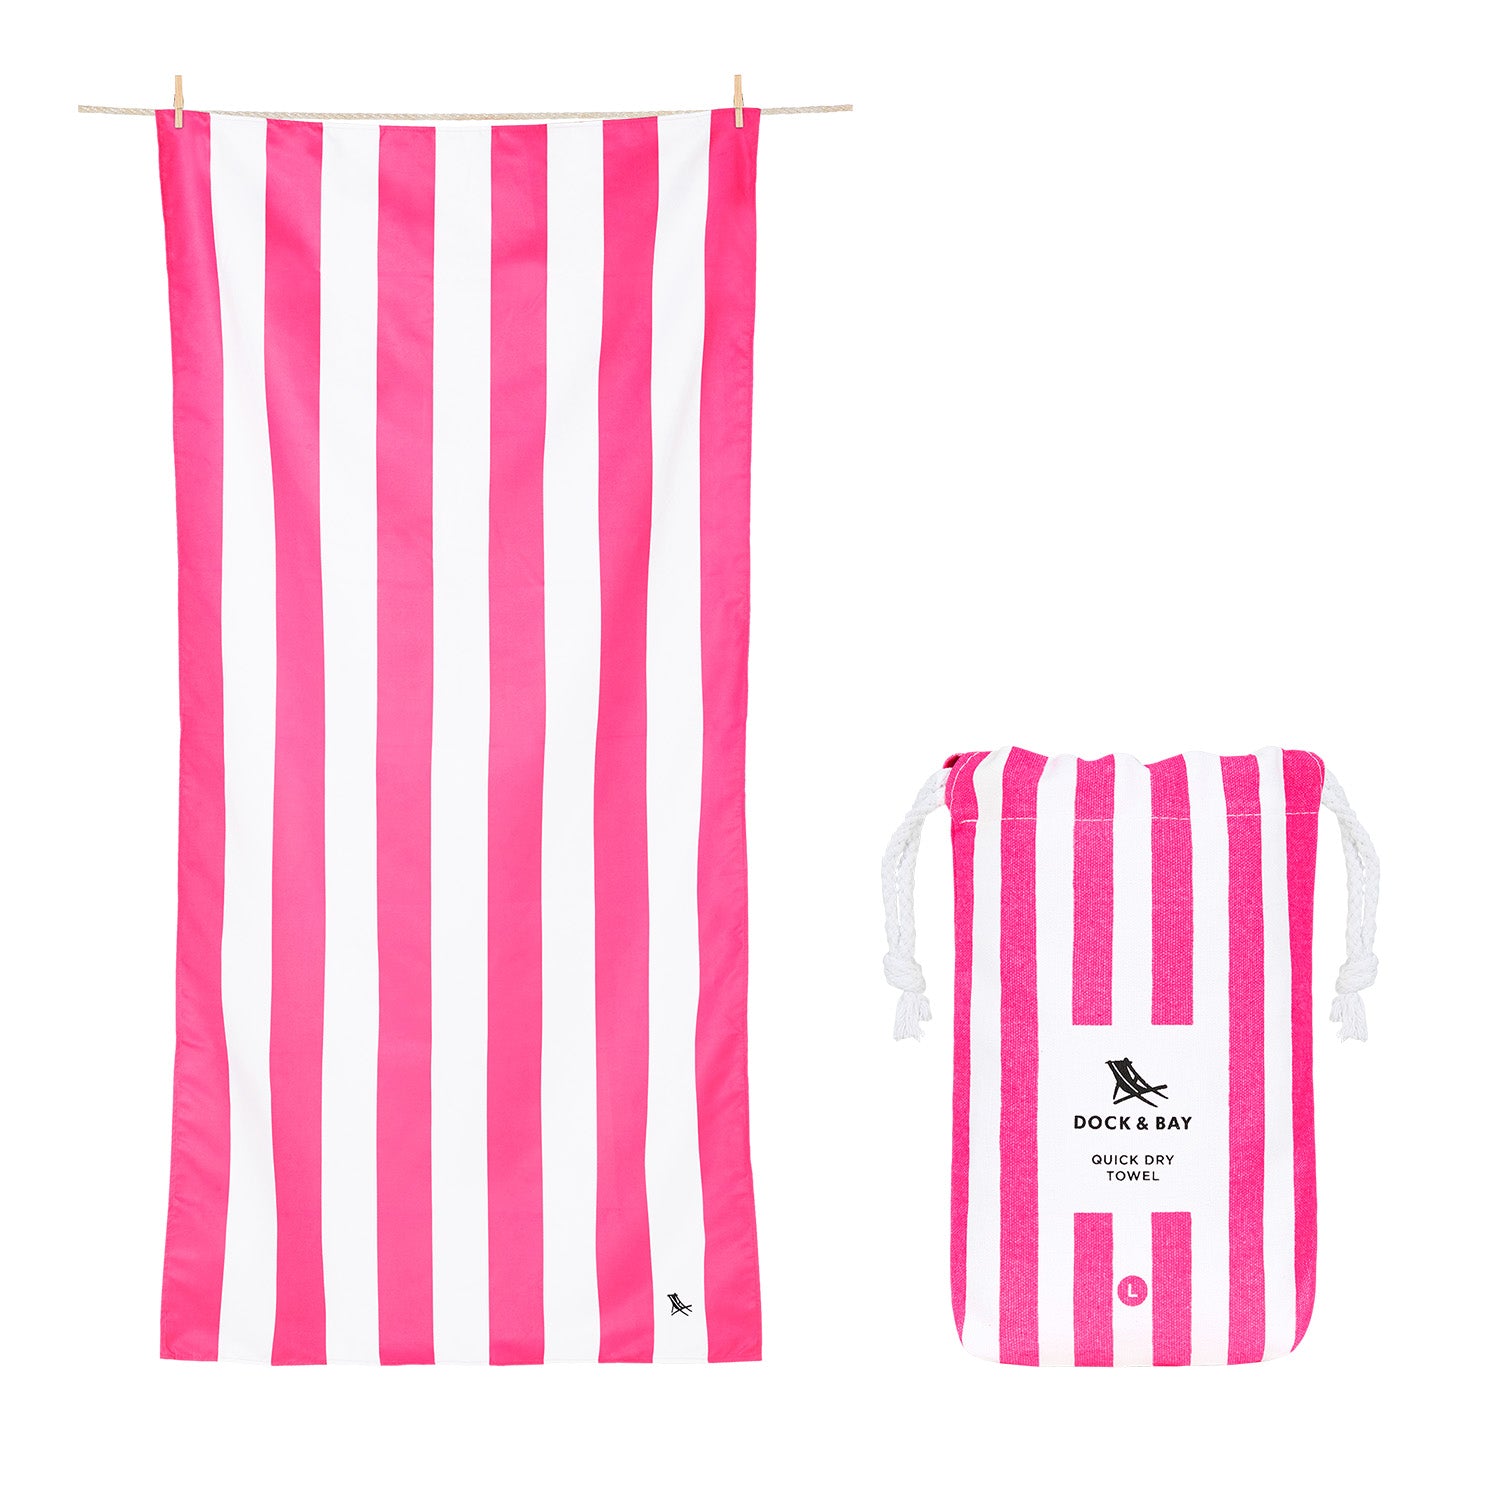 Dock and Bay Cabana Collection Phi Phi Pink Quick Dry Towel